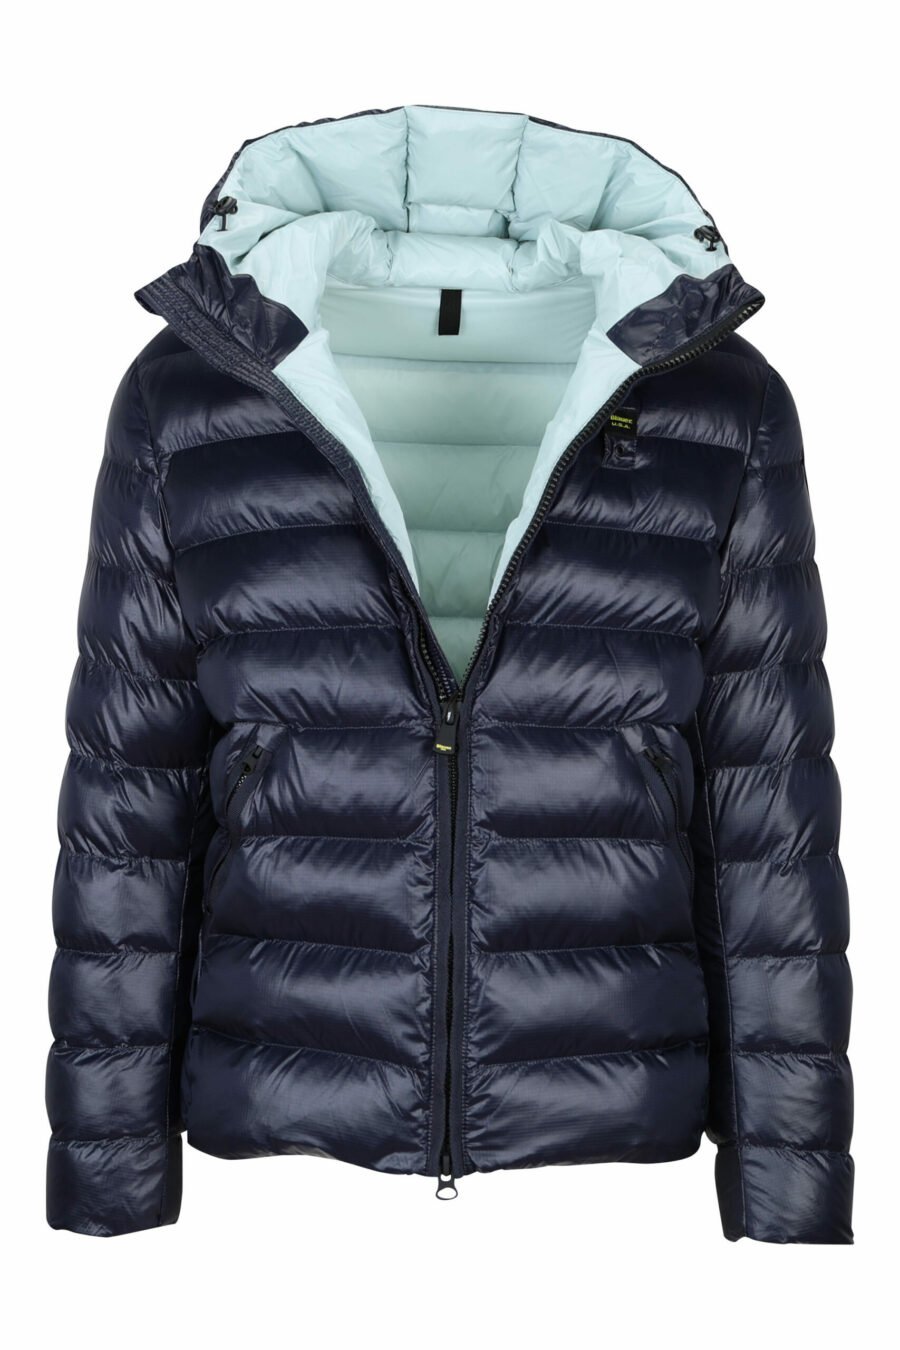 Blue hooded jacket with straight lines with light blue inside - 8058610655884 1 scaled